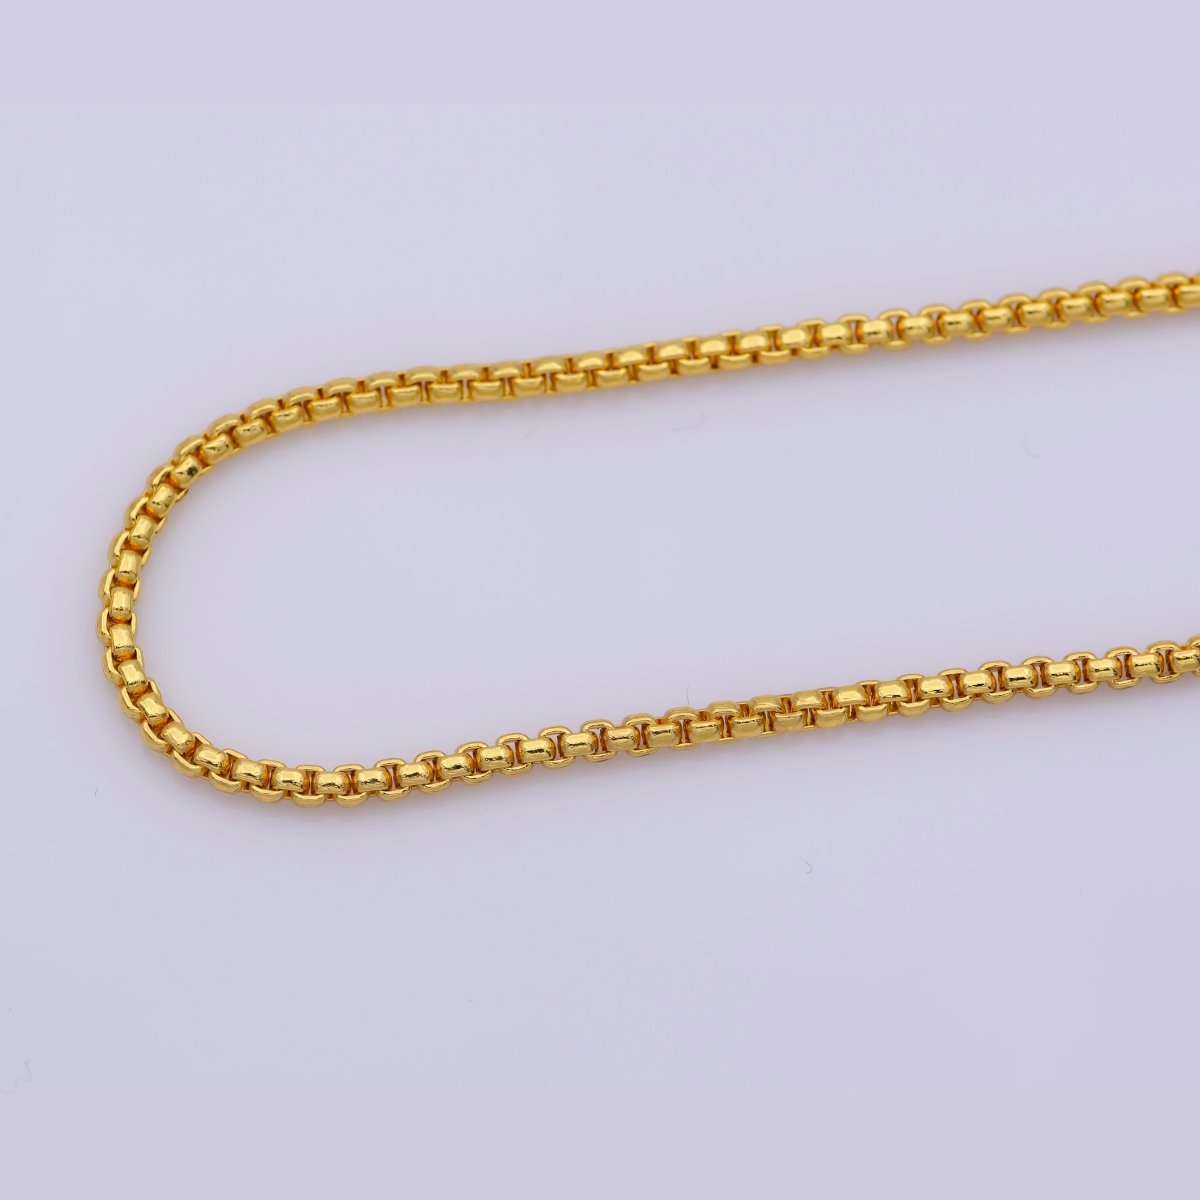 OS 24K Gold Filled Boston Chain Necklace, 17" Finished Chain For Jewelry making, Dainty 2.3mm Cable Necklace w/ Clasps | CN-324 - DLUXCA